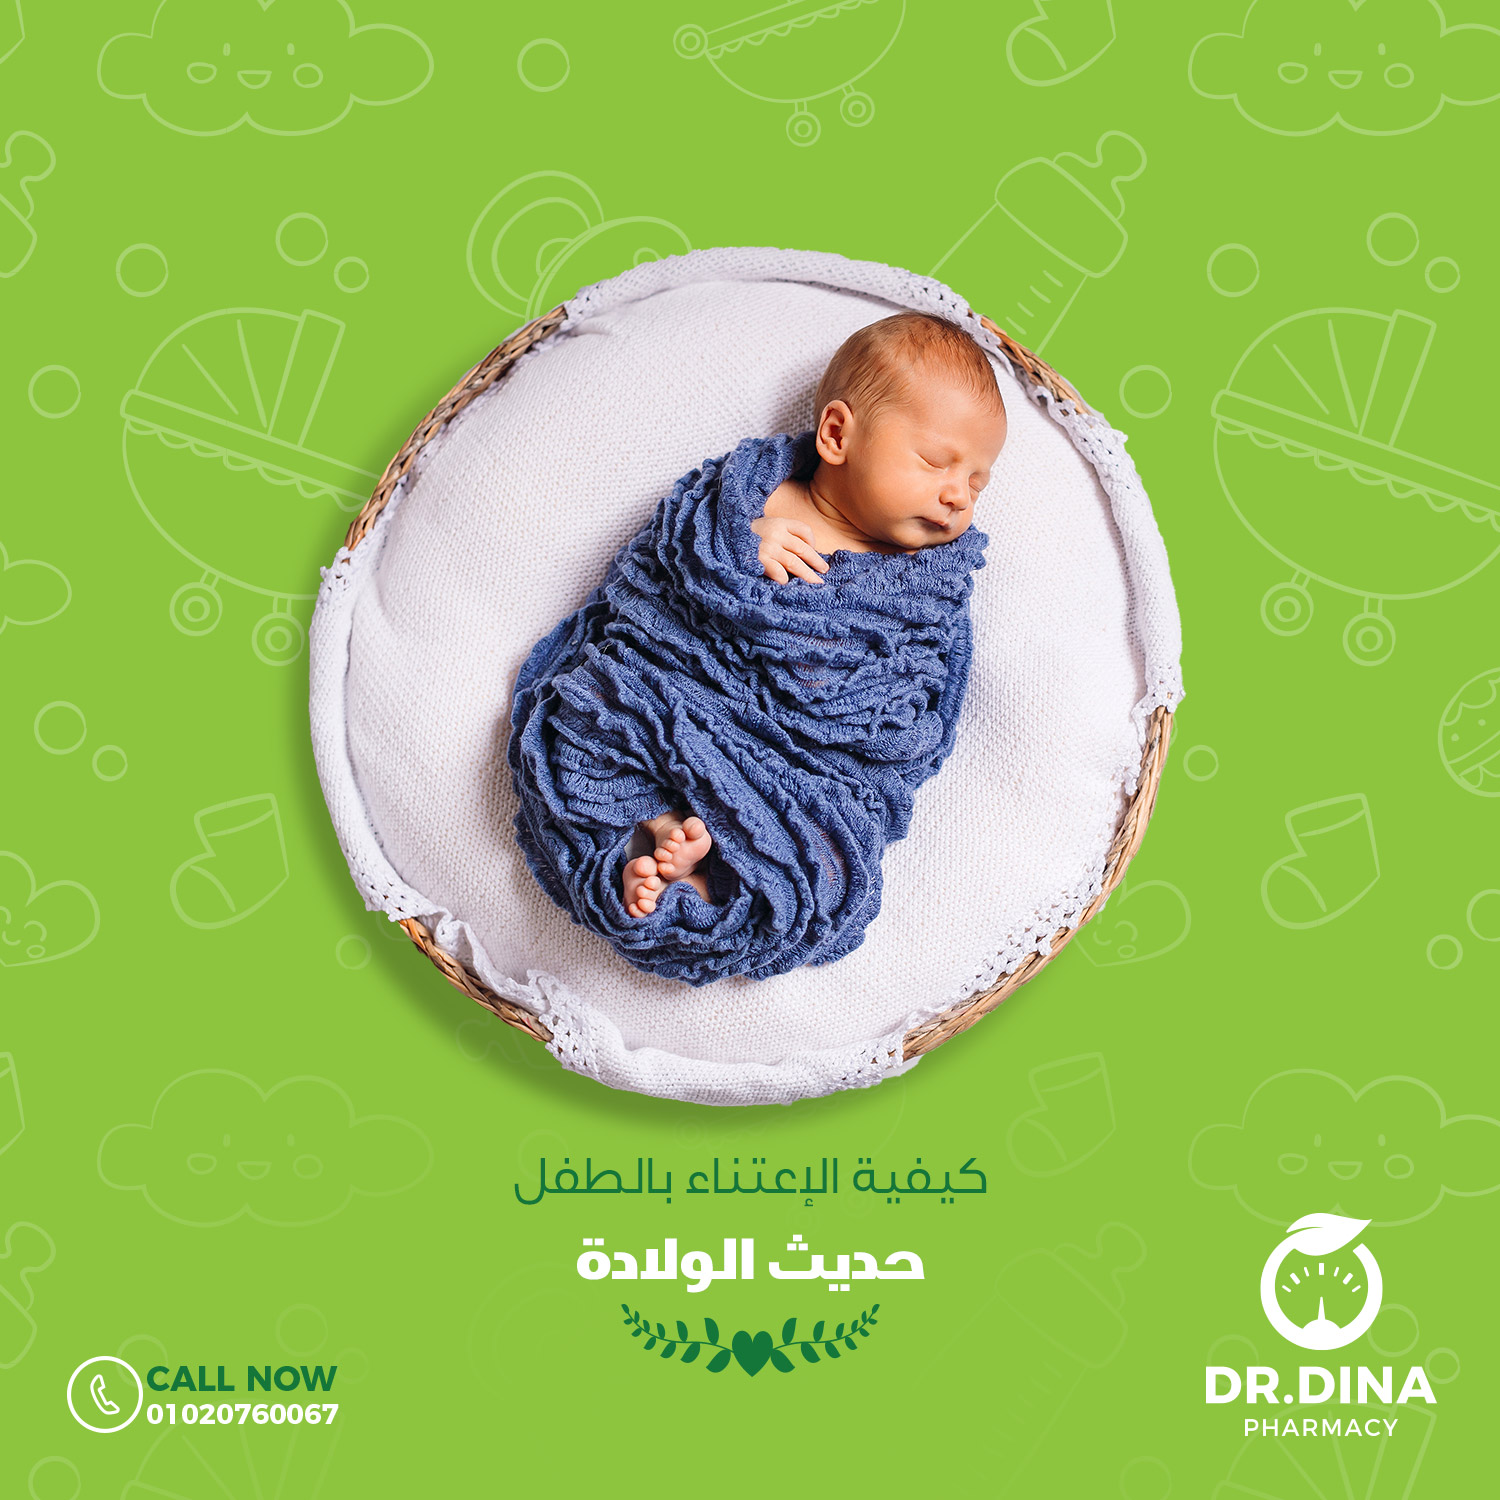 Dr.Dina Baby Advice Campaign Social Media Campaign Mother Caring copywriting 